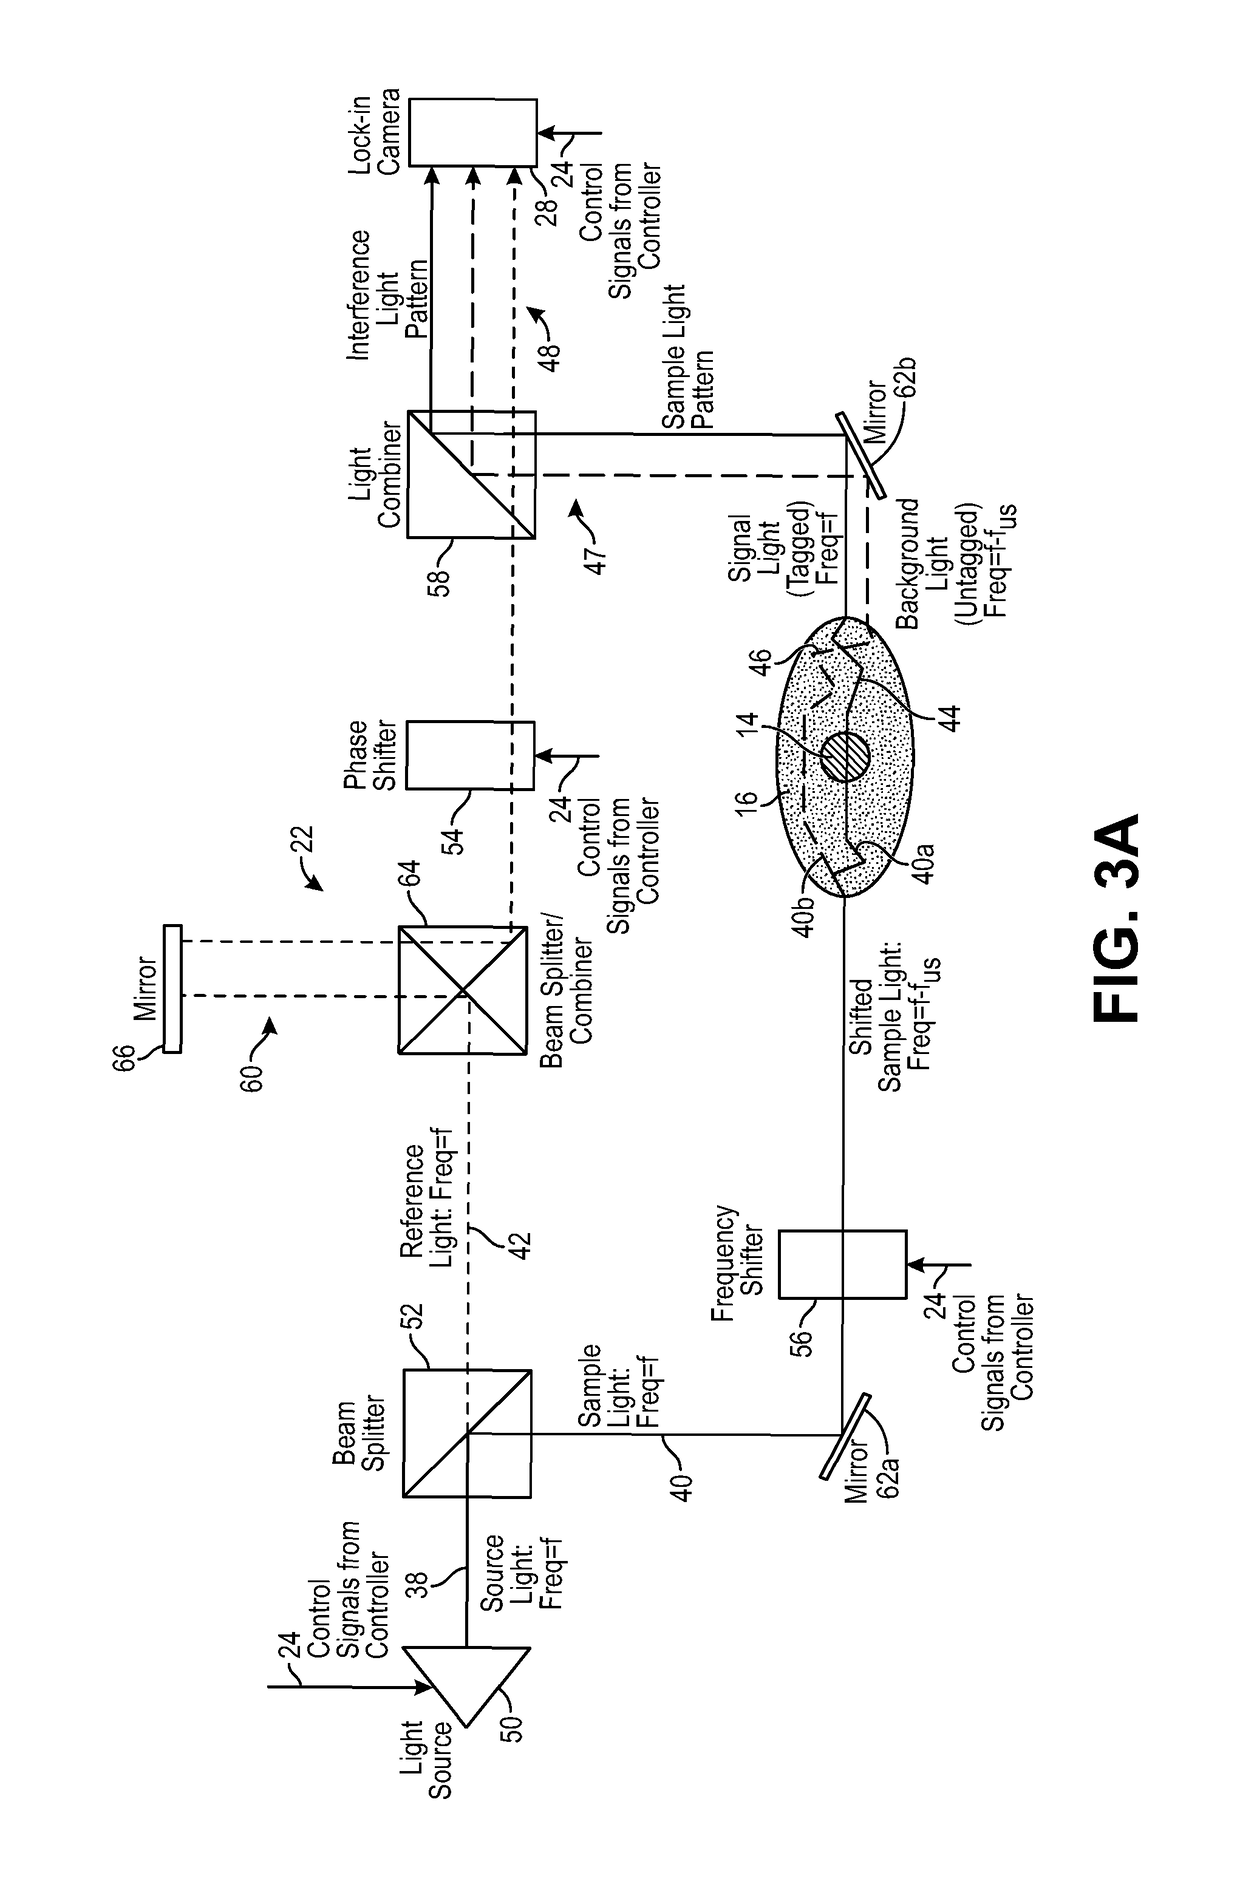 System and method for simultaneously detecting phase modulated optical signals